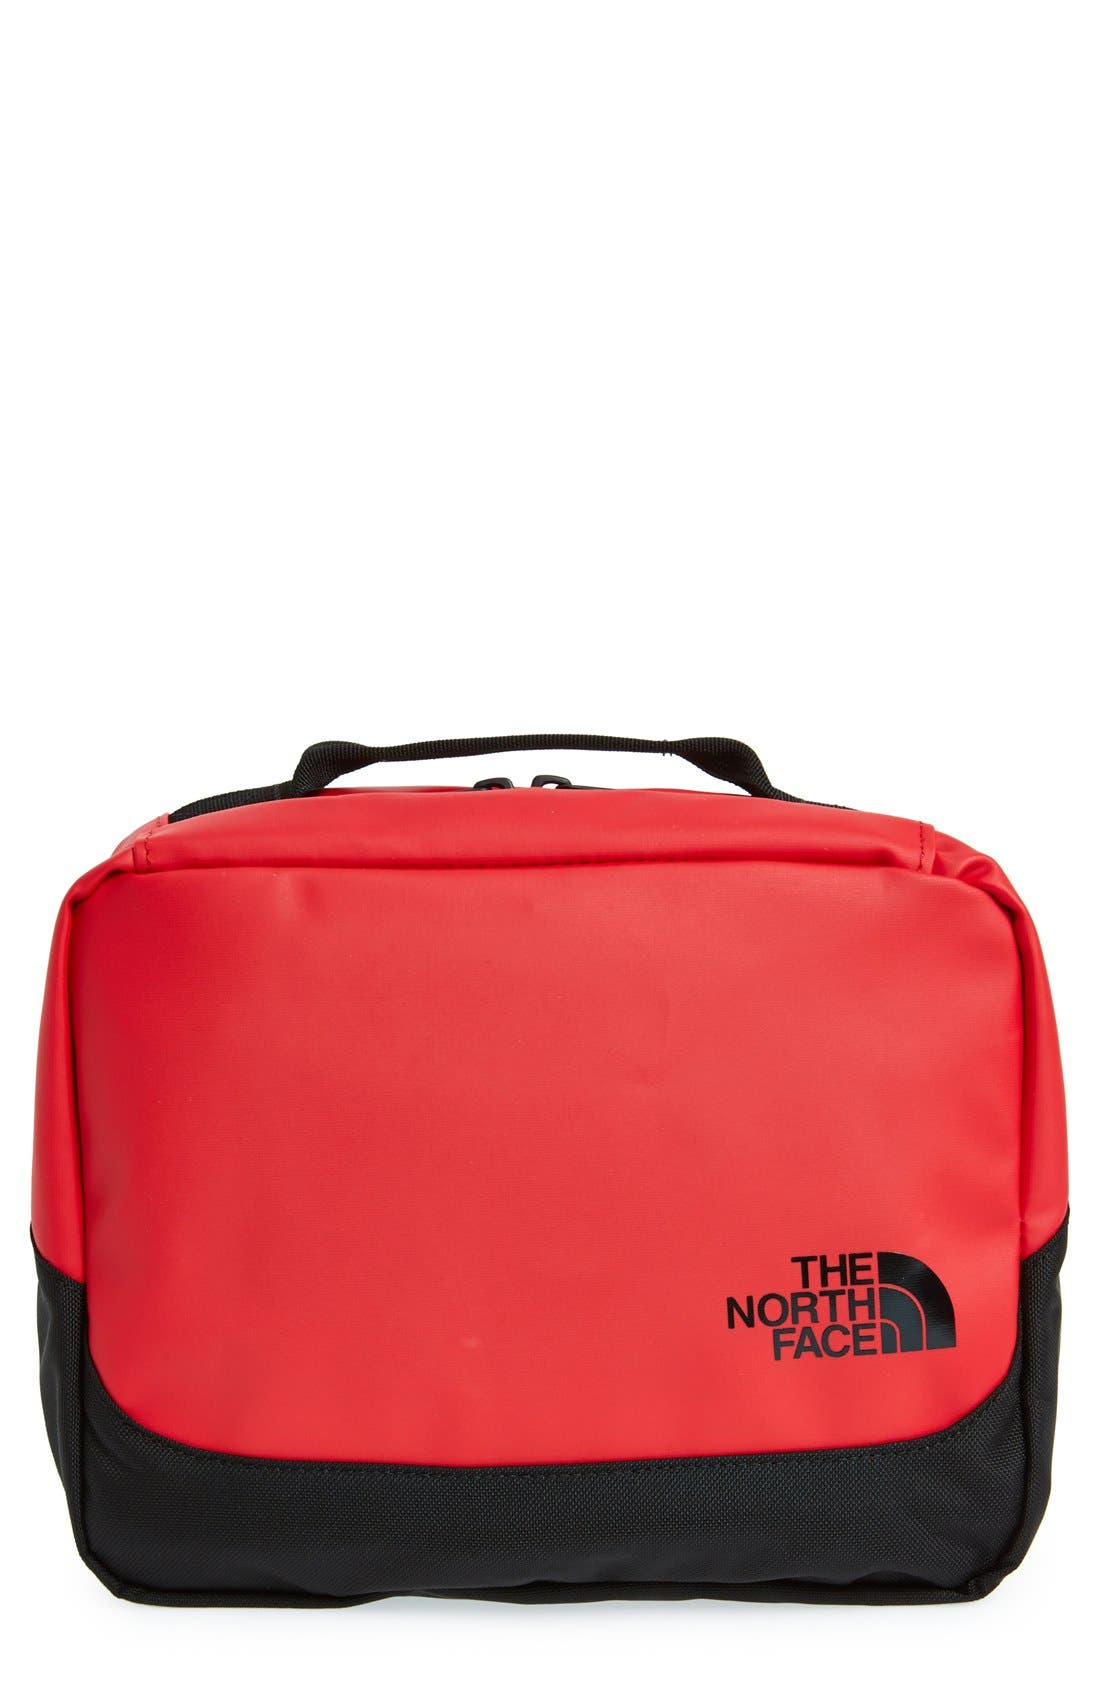 The North Face 'Base Camp' Travel Kit 